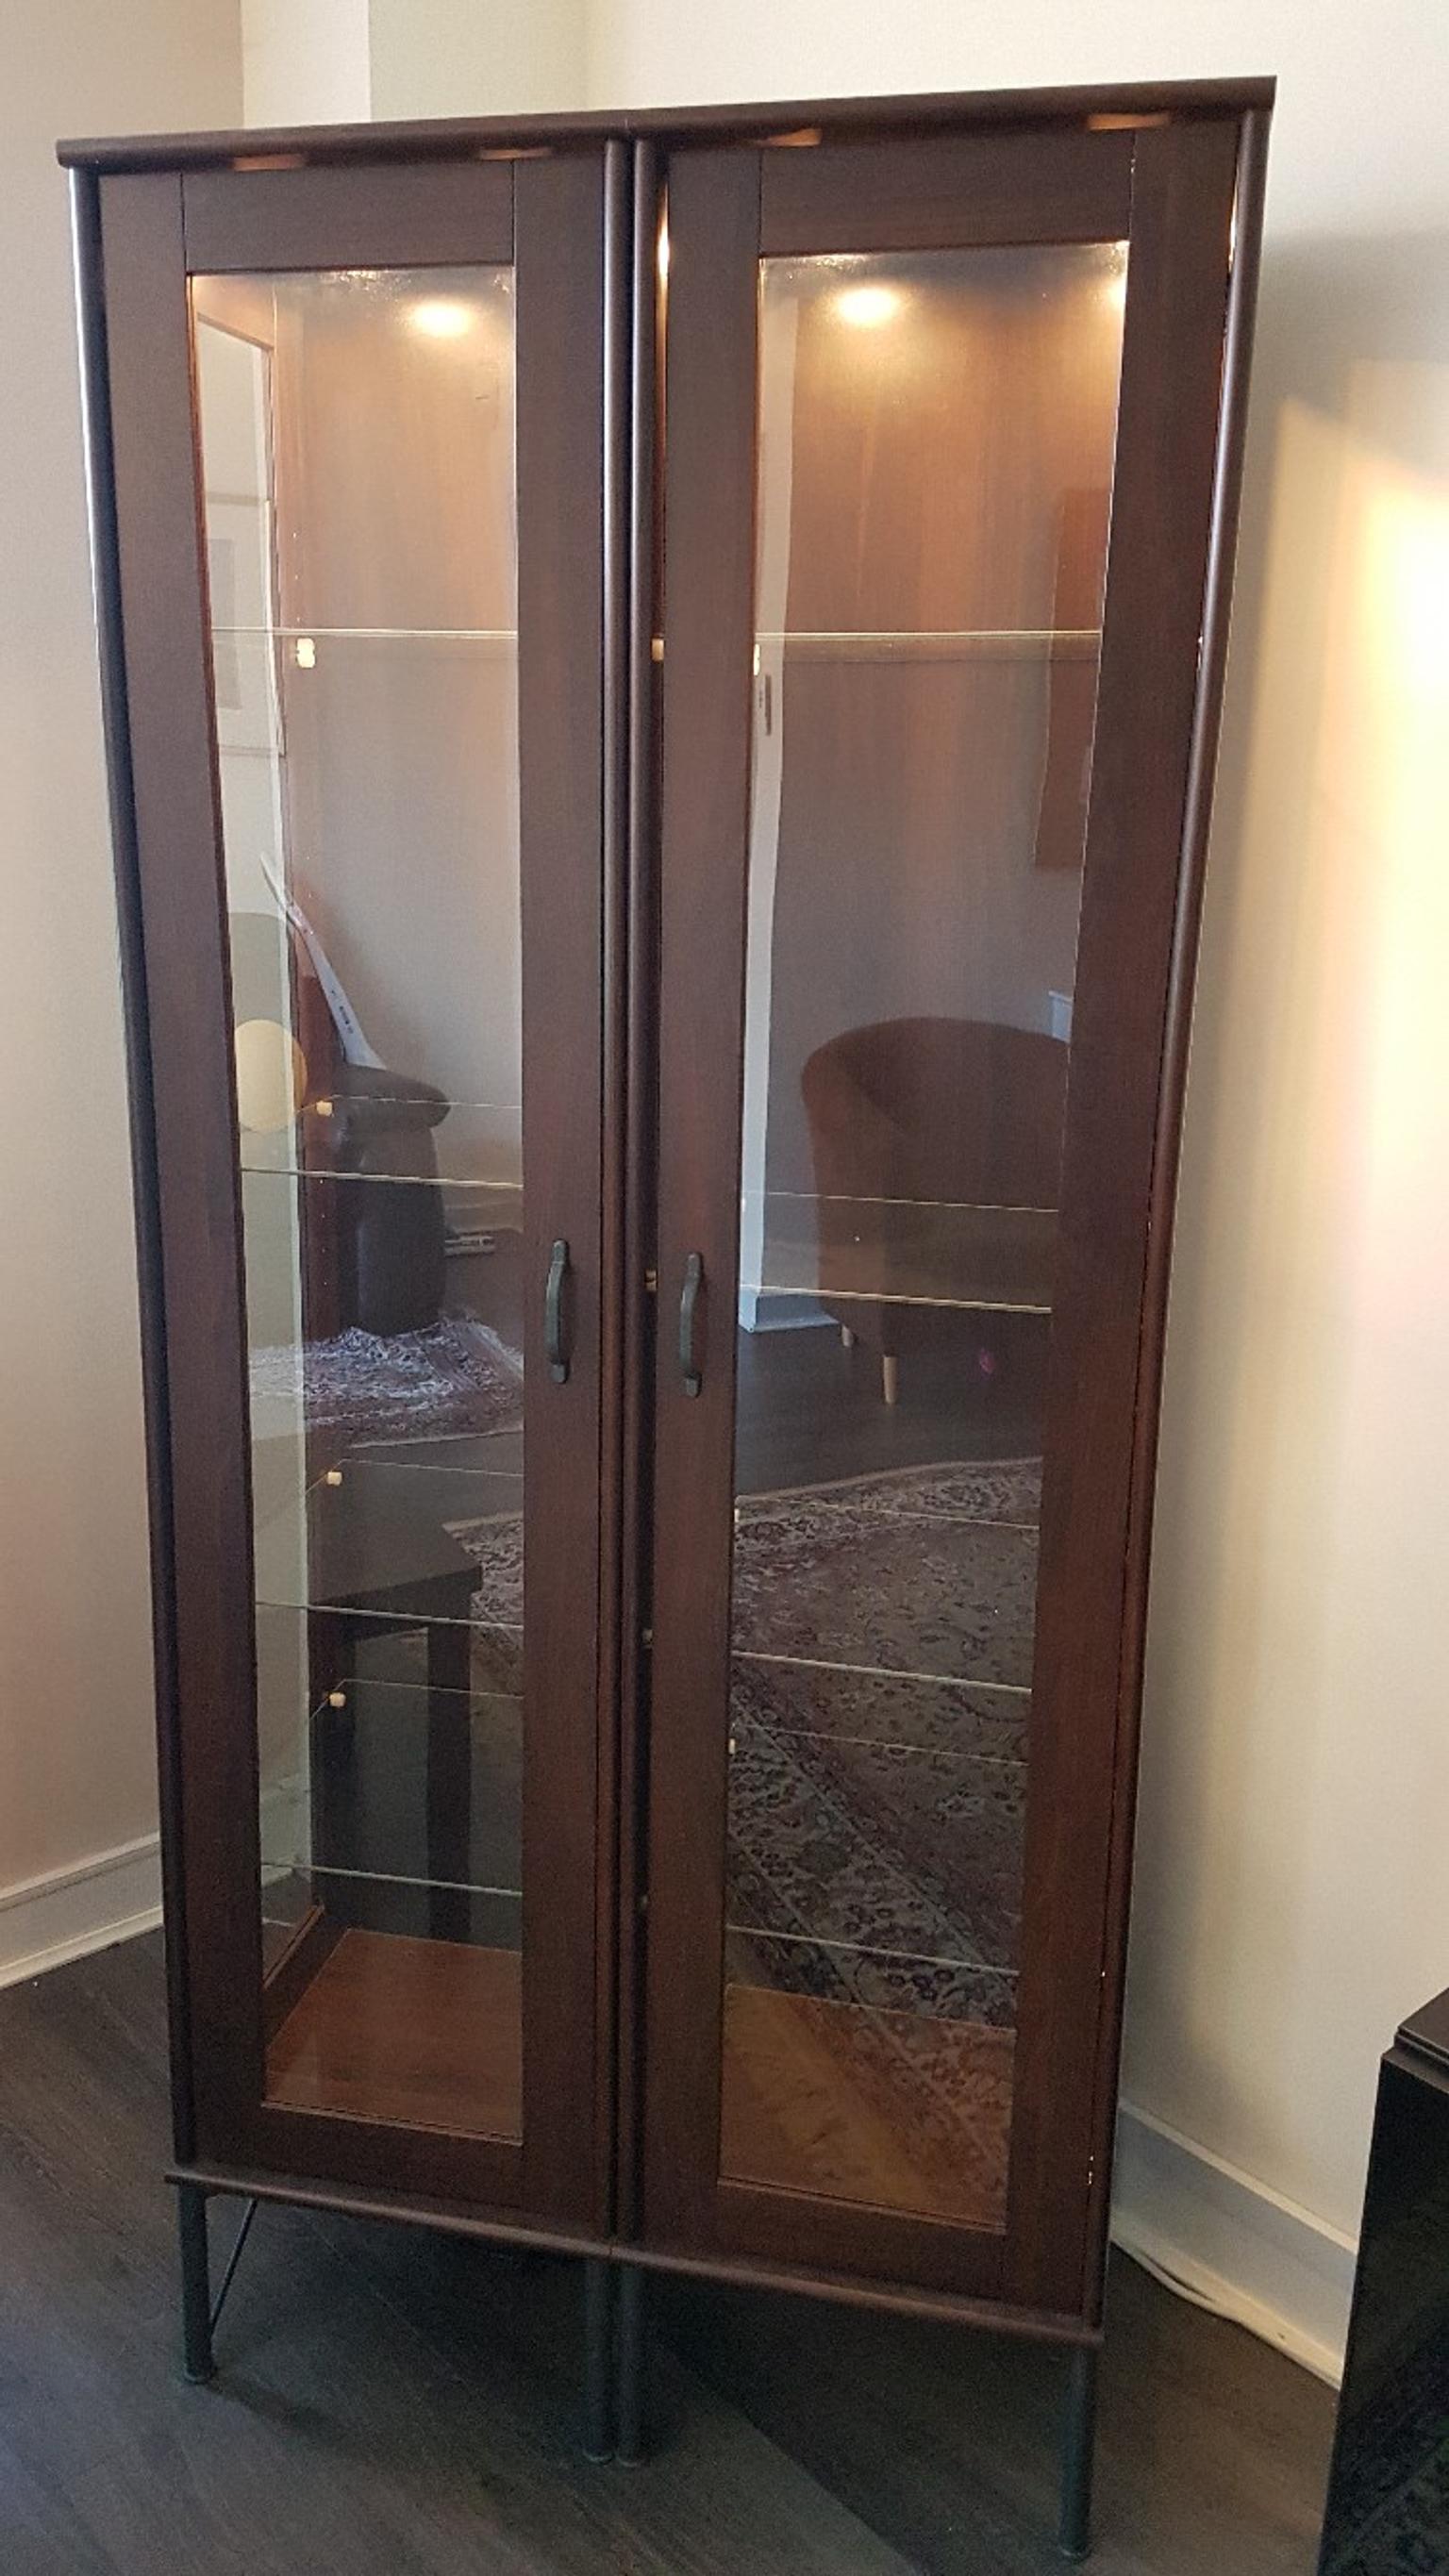 Glass Display Cabinet Ikea In Ub4 London For 90 00 For Sale Shpock